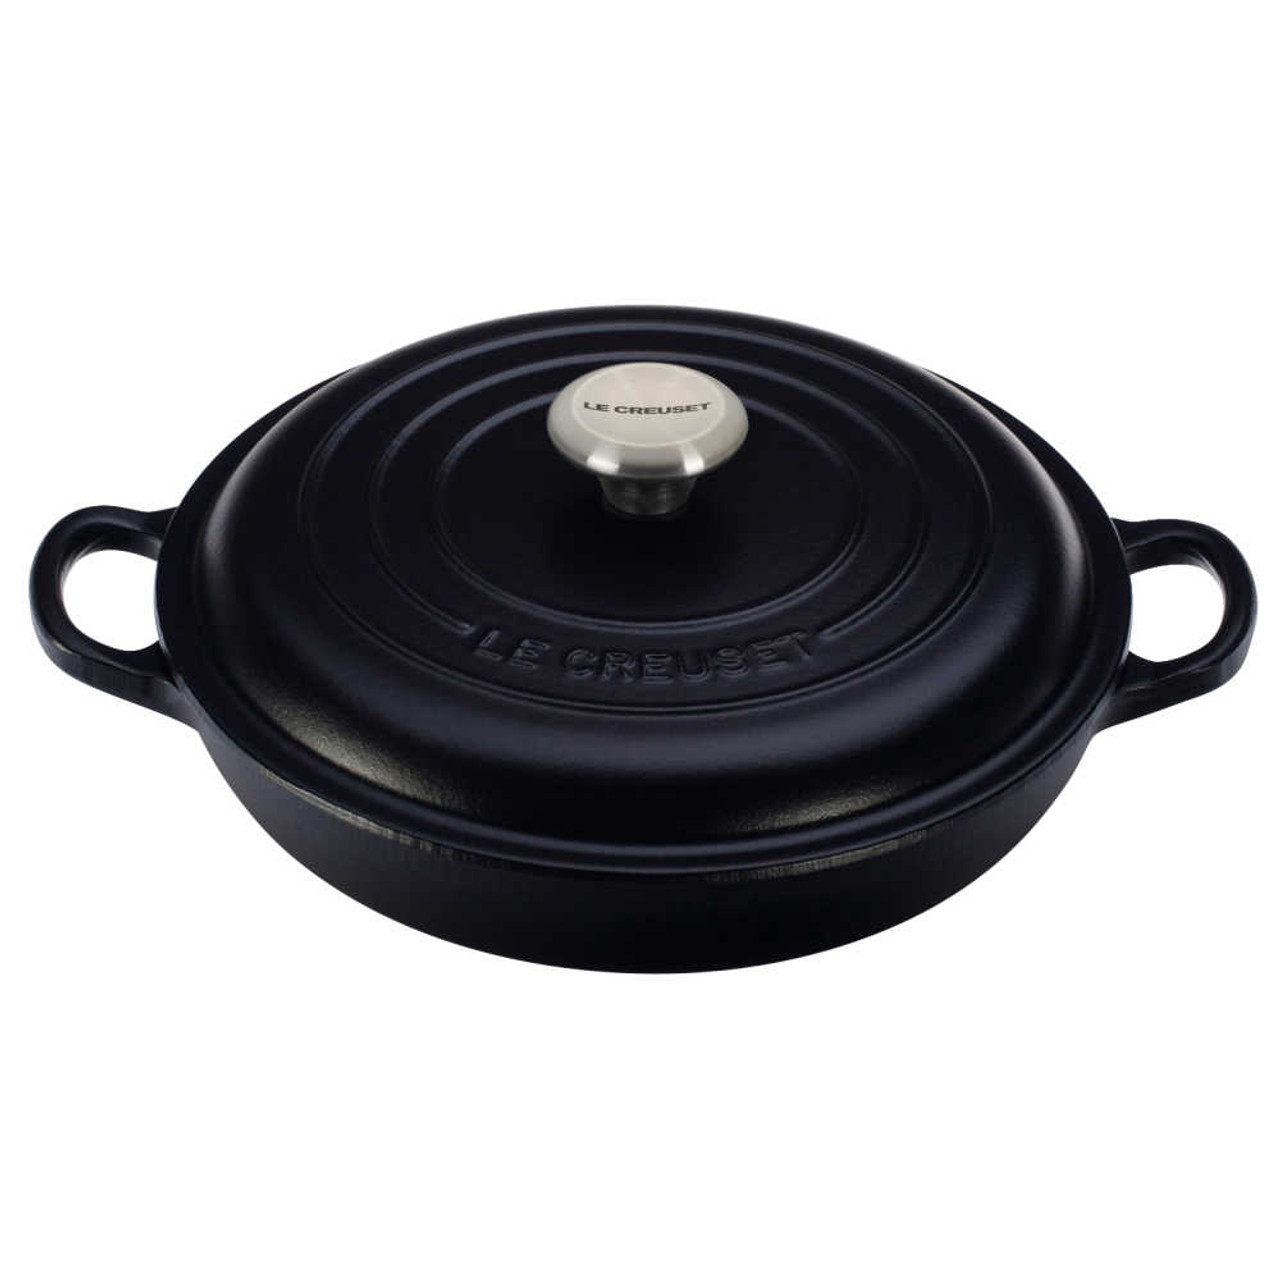 https://cdn11.bigcommerce.com/s-hccytny0od/images/stencil/1280x1280/products/3374/13530/le-creuset-braiser-licorice-1qt_1__55607.1614693518.jpg?c=2?imbypass=on